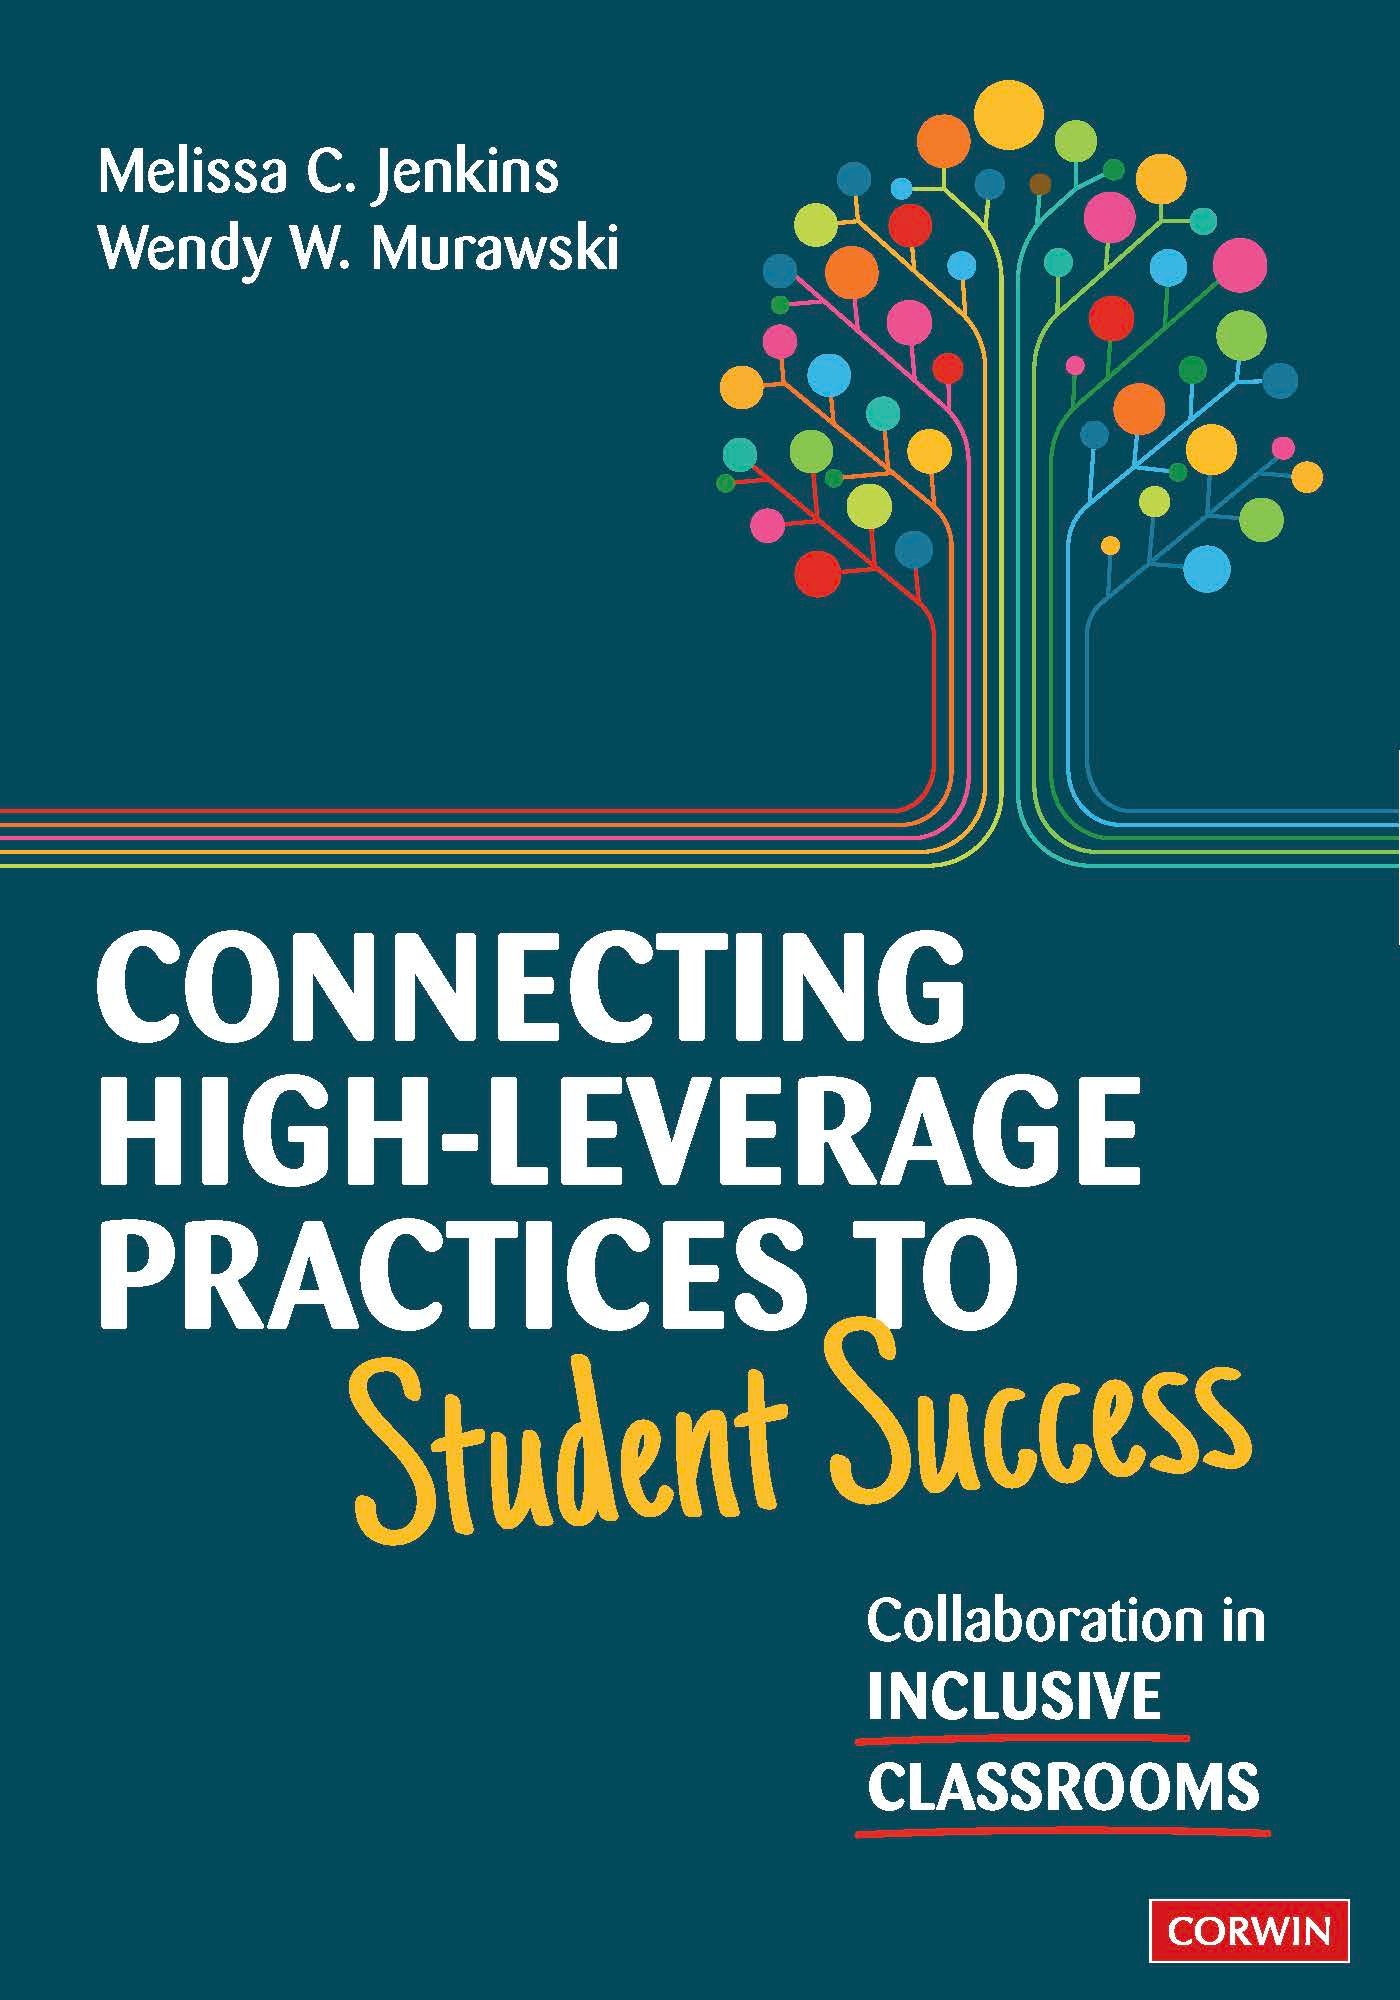 High Leverage Practices and Collaboration book cover